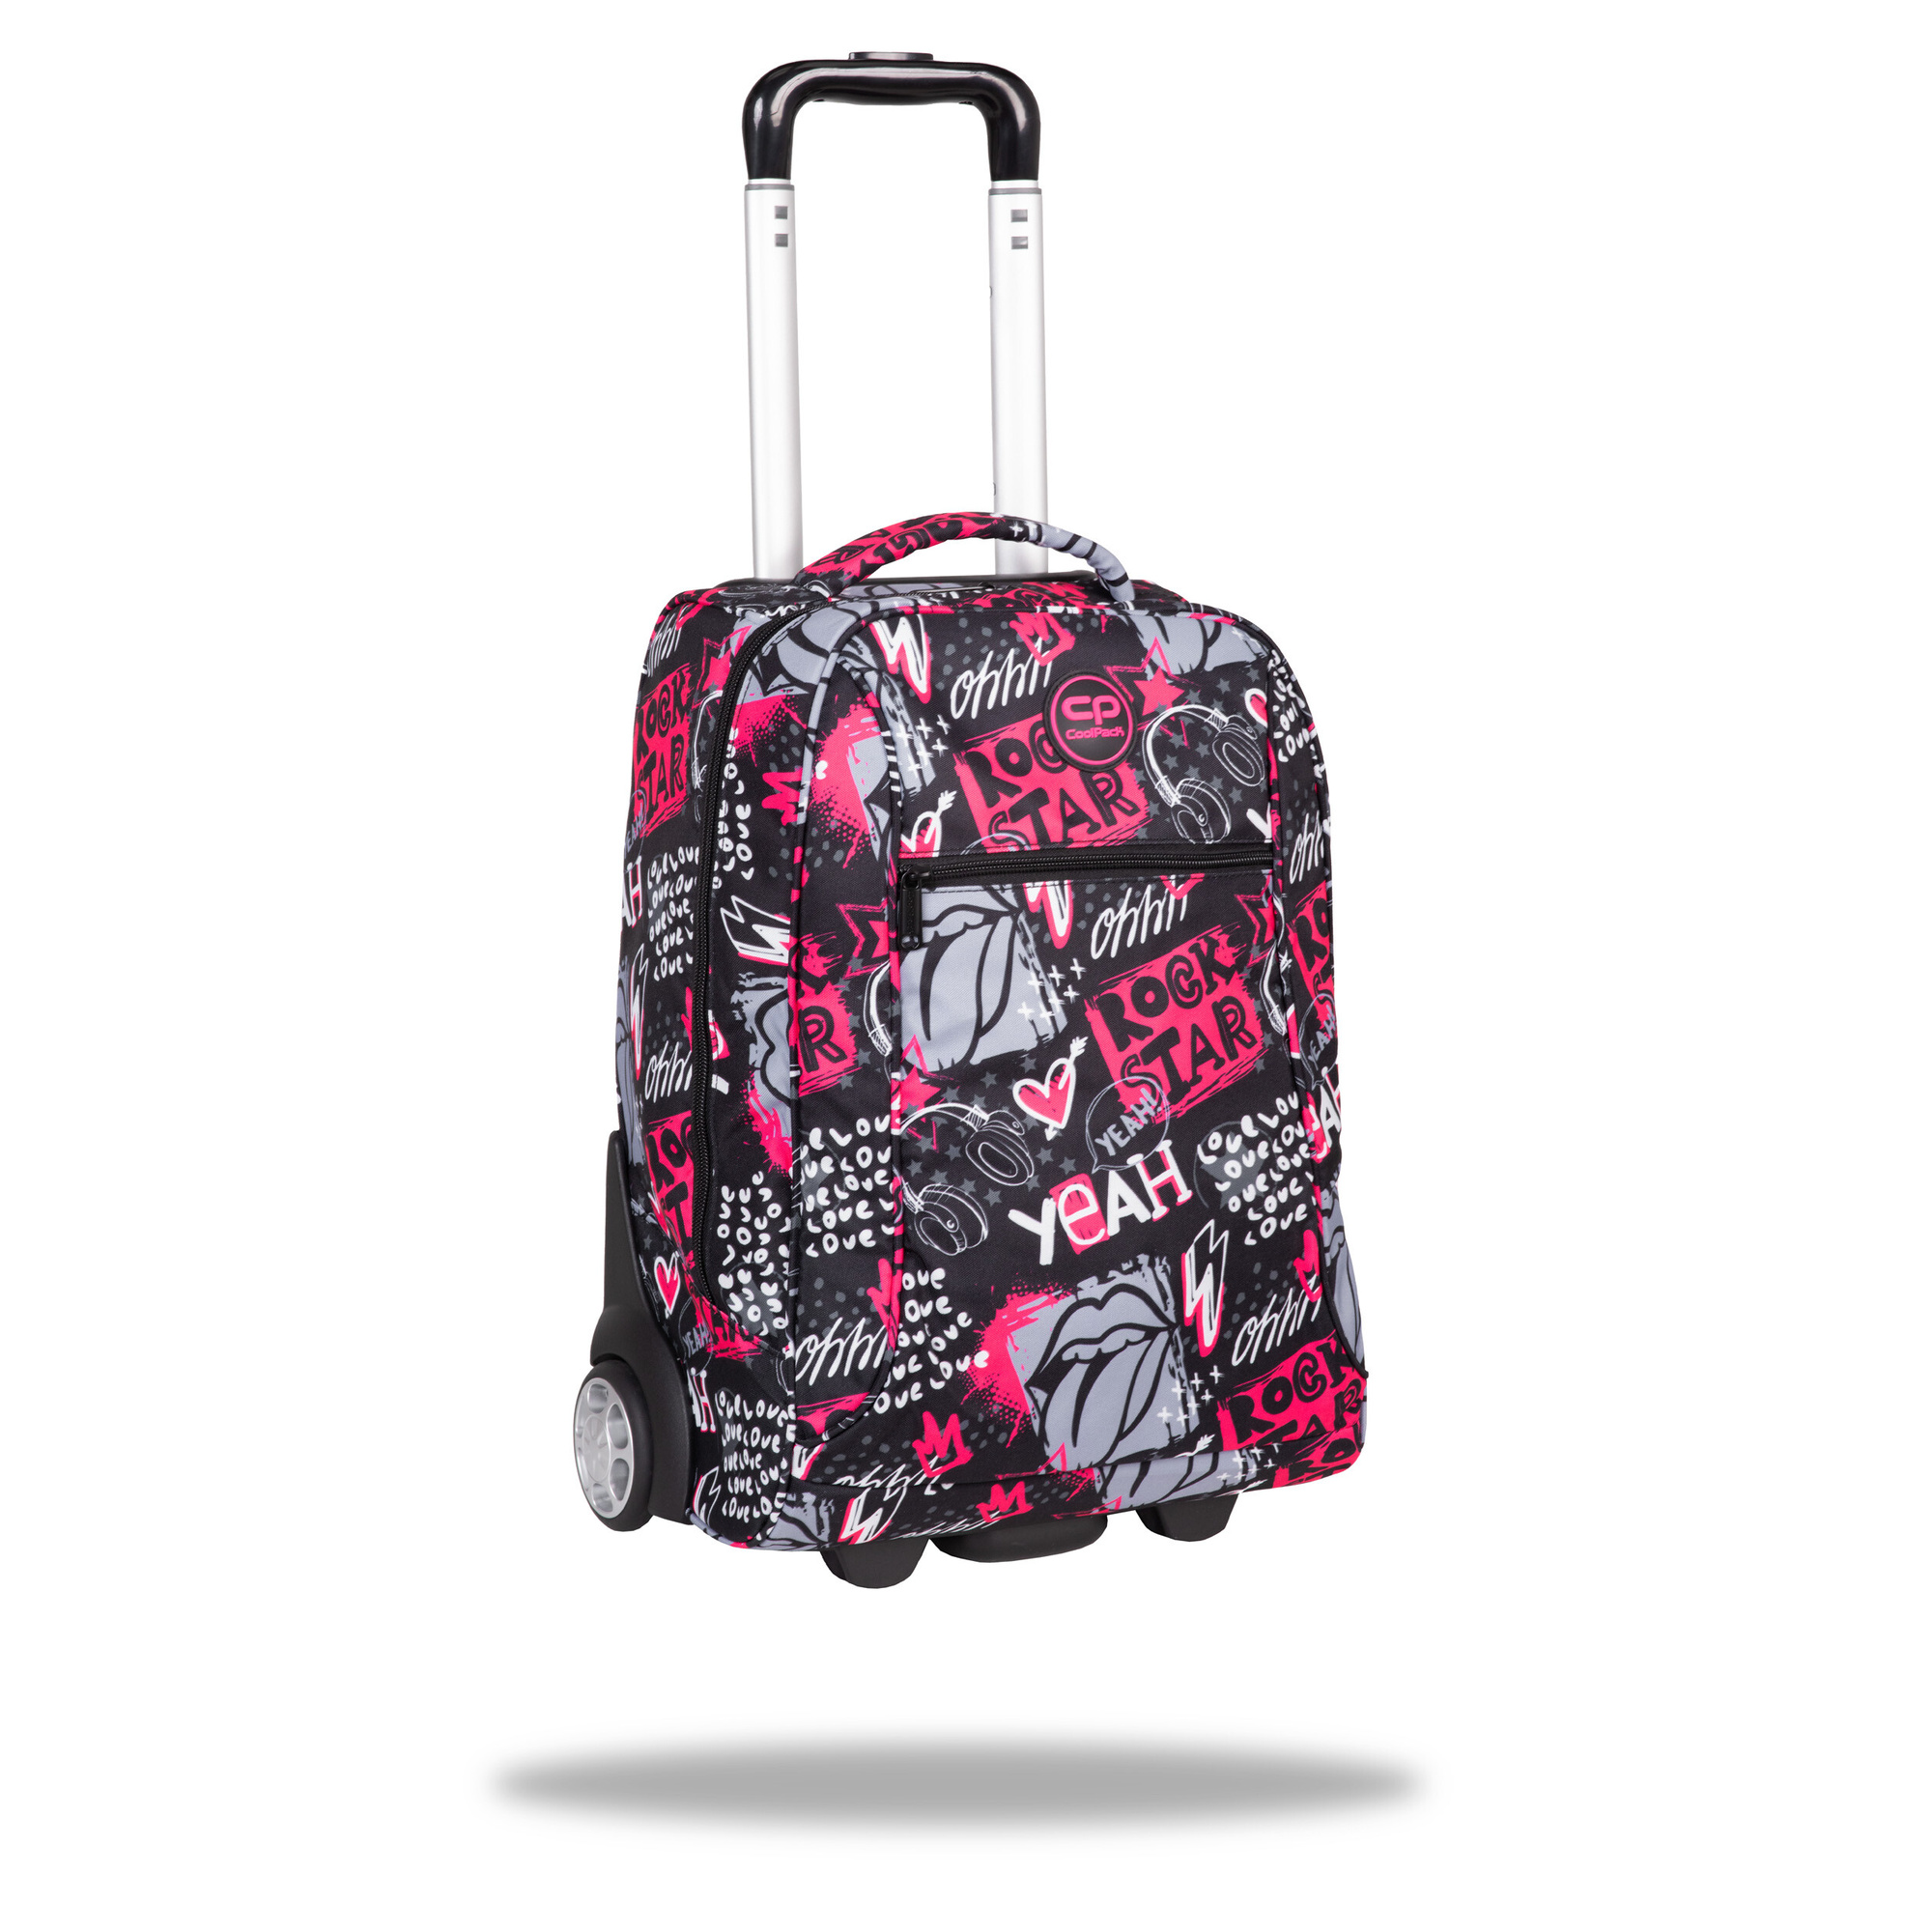 Trolley scuola coolpack voyager rock star: grande comparto, doppia asta, waterproof - Coolpack